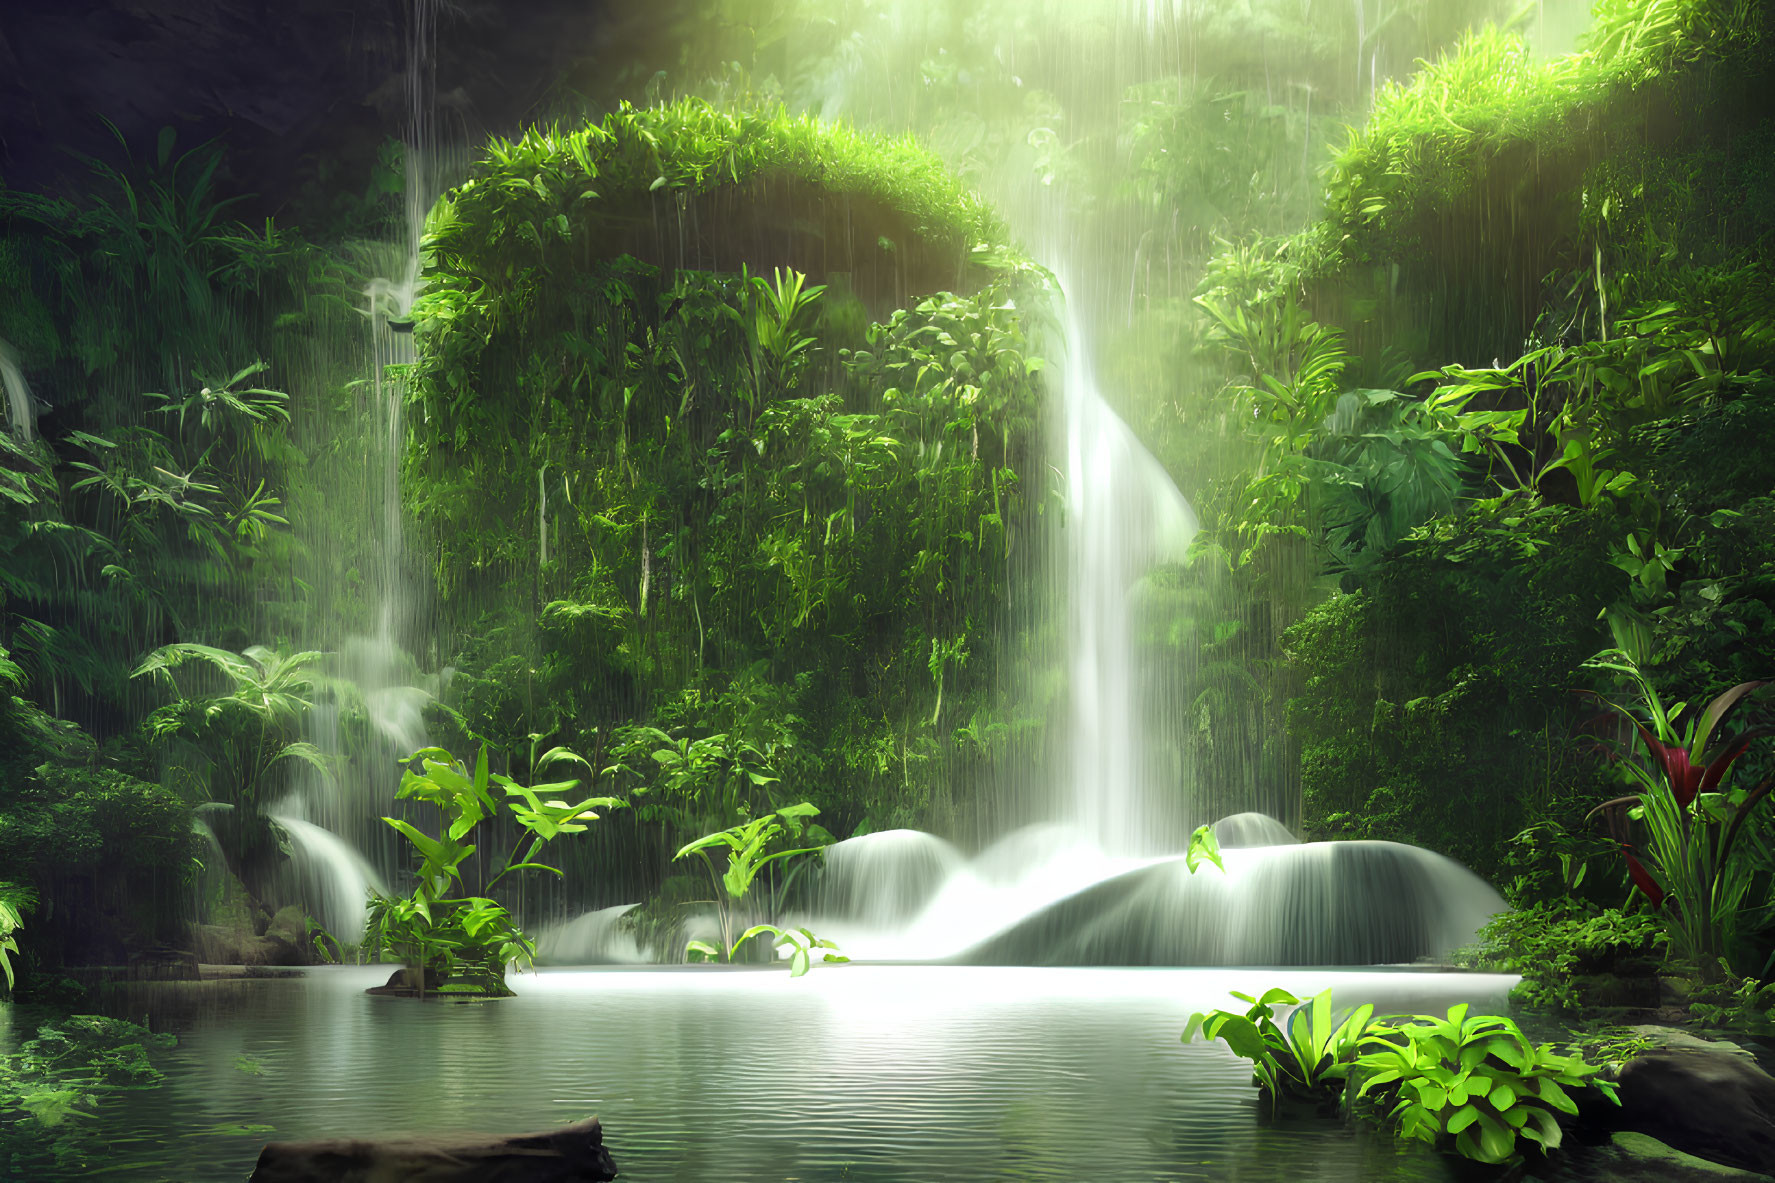 Tranquil waterfall in lush rainforest setting